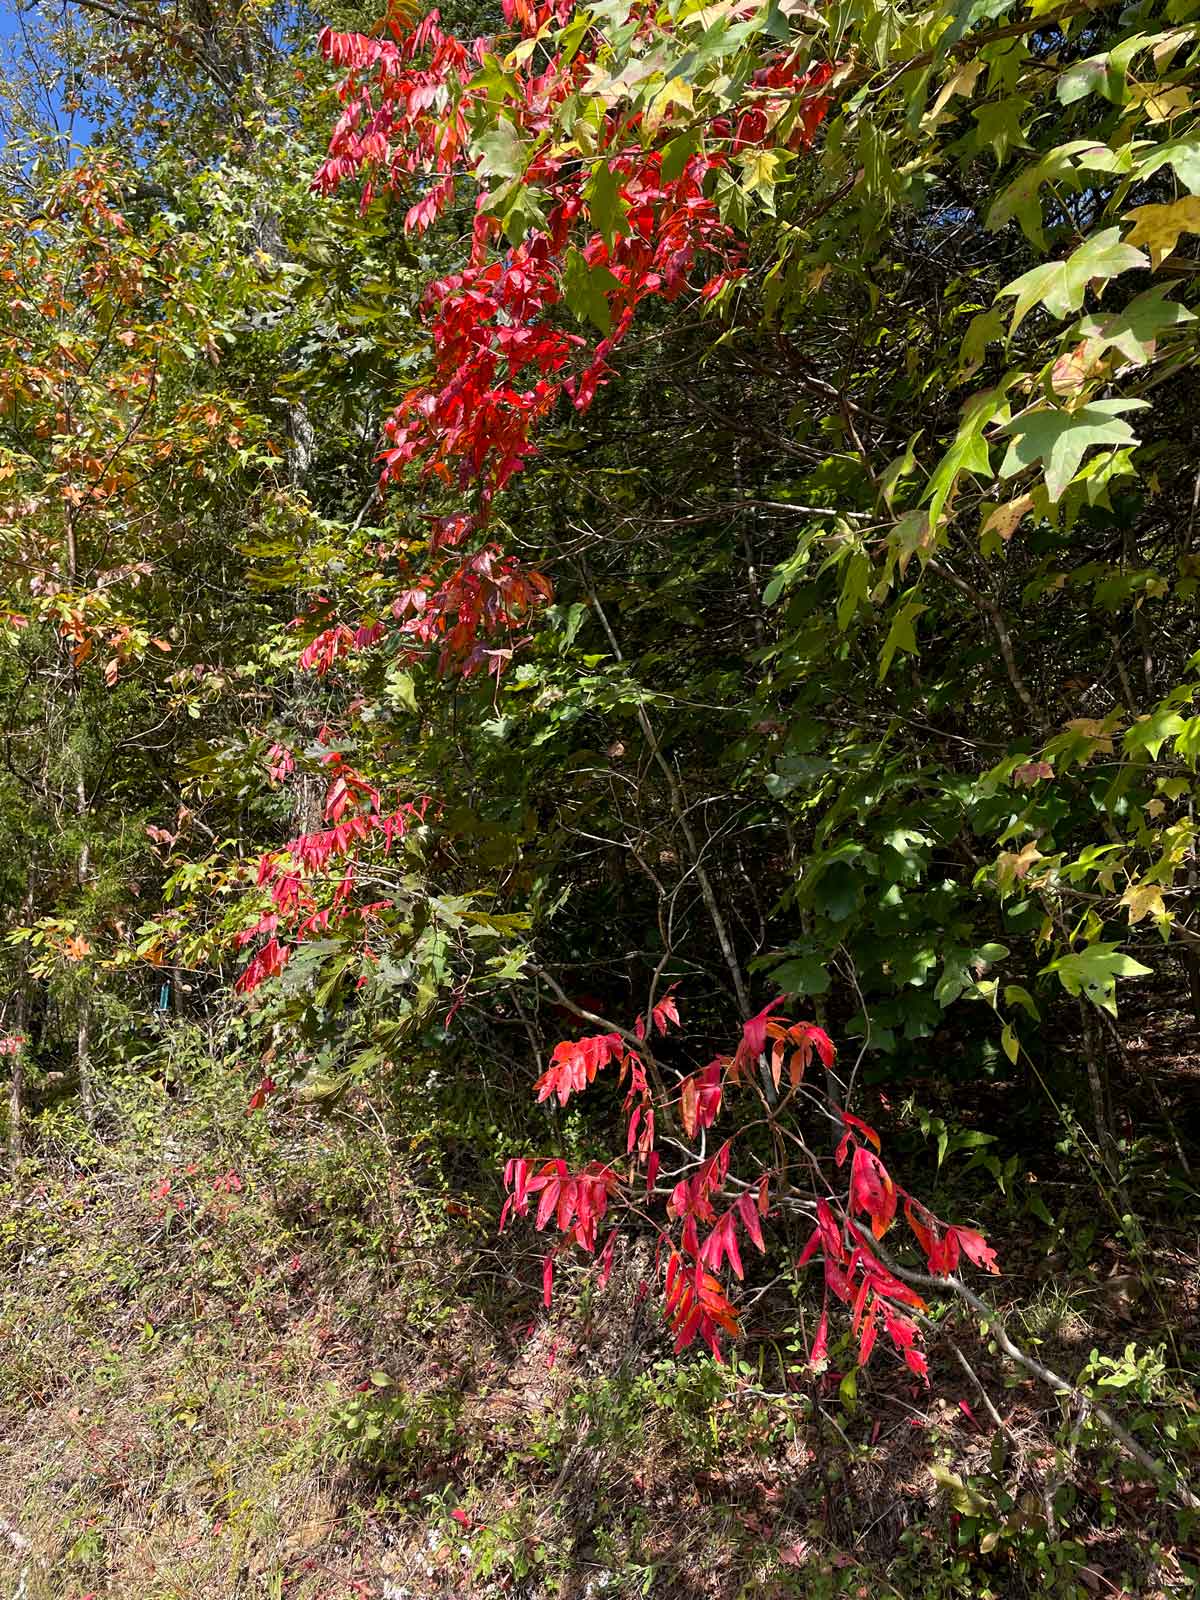 Sumac turns a brilliant red in early fall.